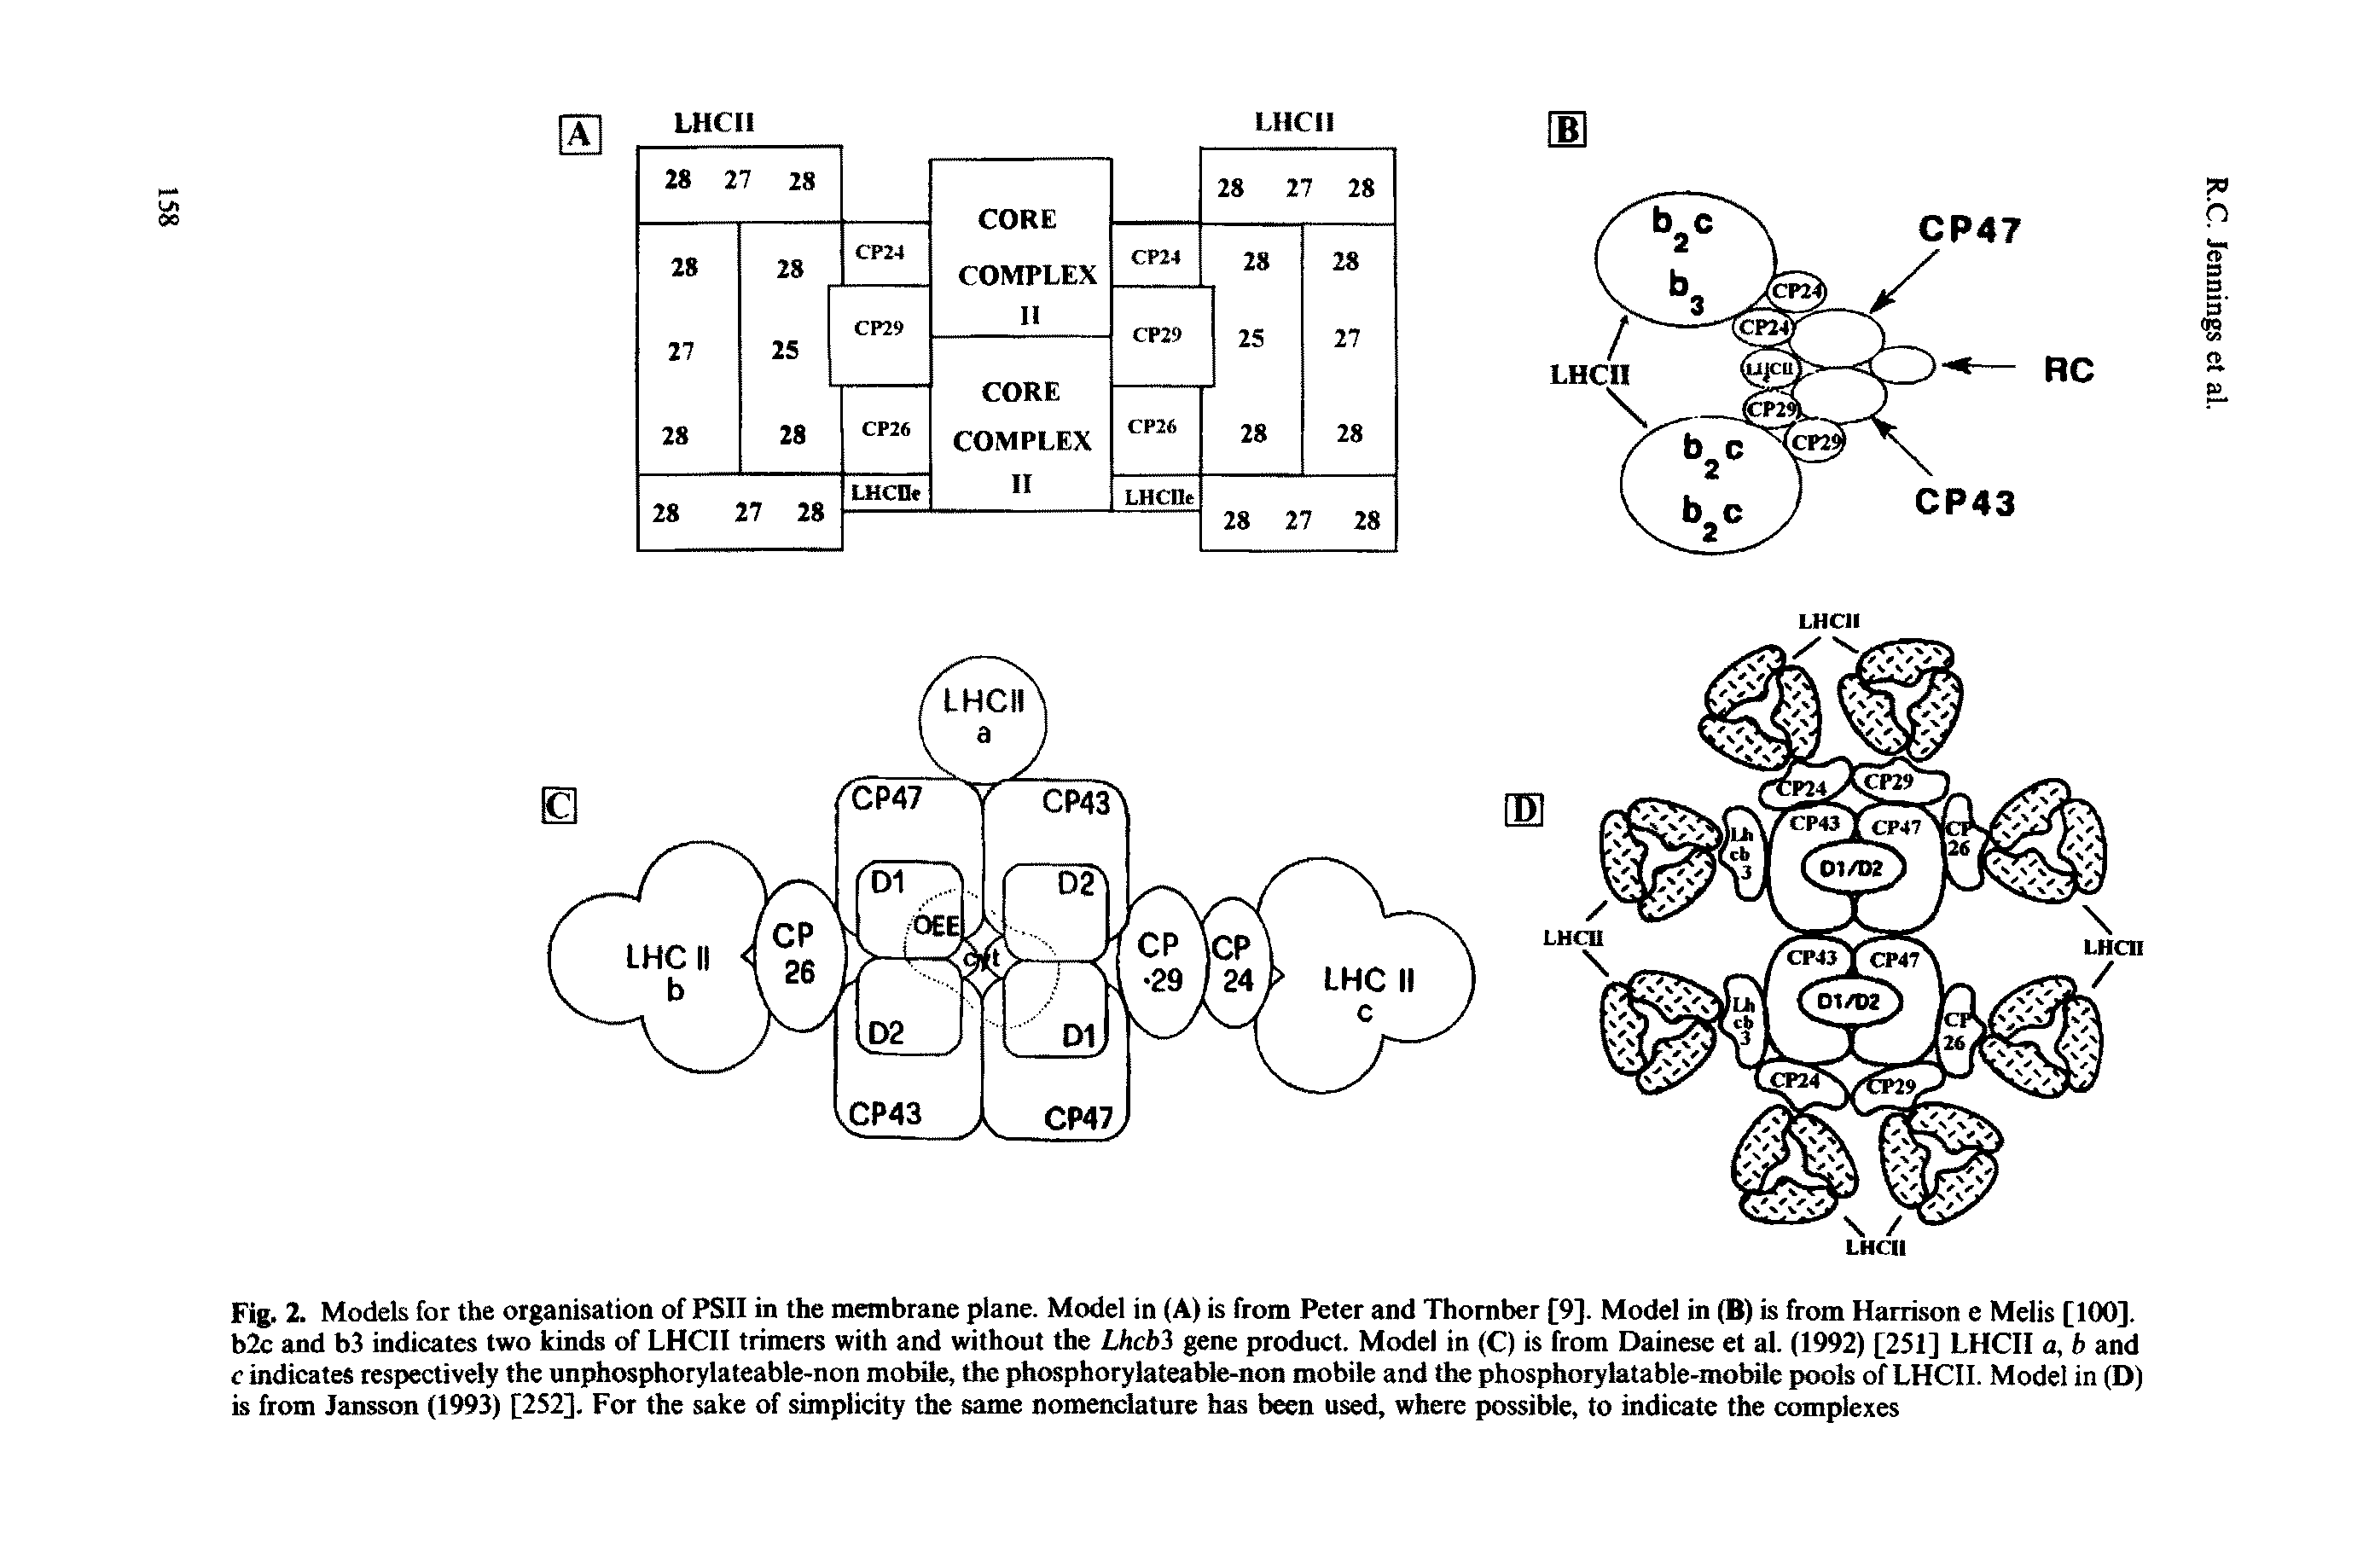 Fig. 2. Models for the organisation of PSII in the membrane plane. Model in (A) is from Peter and Thomber [9]. Model in (B) is from Harrison e Melis [100]. b2c and b3 indicates two kinds of LHCII trimers with and without the Lhchi gene product. Model in (C) is from Dainese et al. (1992) [251] LHCII a, b and c indicates respectively the unphosphorylateable-non mobile, the phosphorylateable-non mobile and the phosphorylatable-mobile pools of LHCII. Model in (D) is from Jansson (1993) [252]. For the sake of simplicity the same nomenclature has been used, where possible, to indicate the complexes...